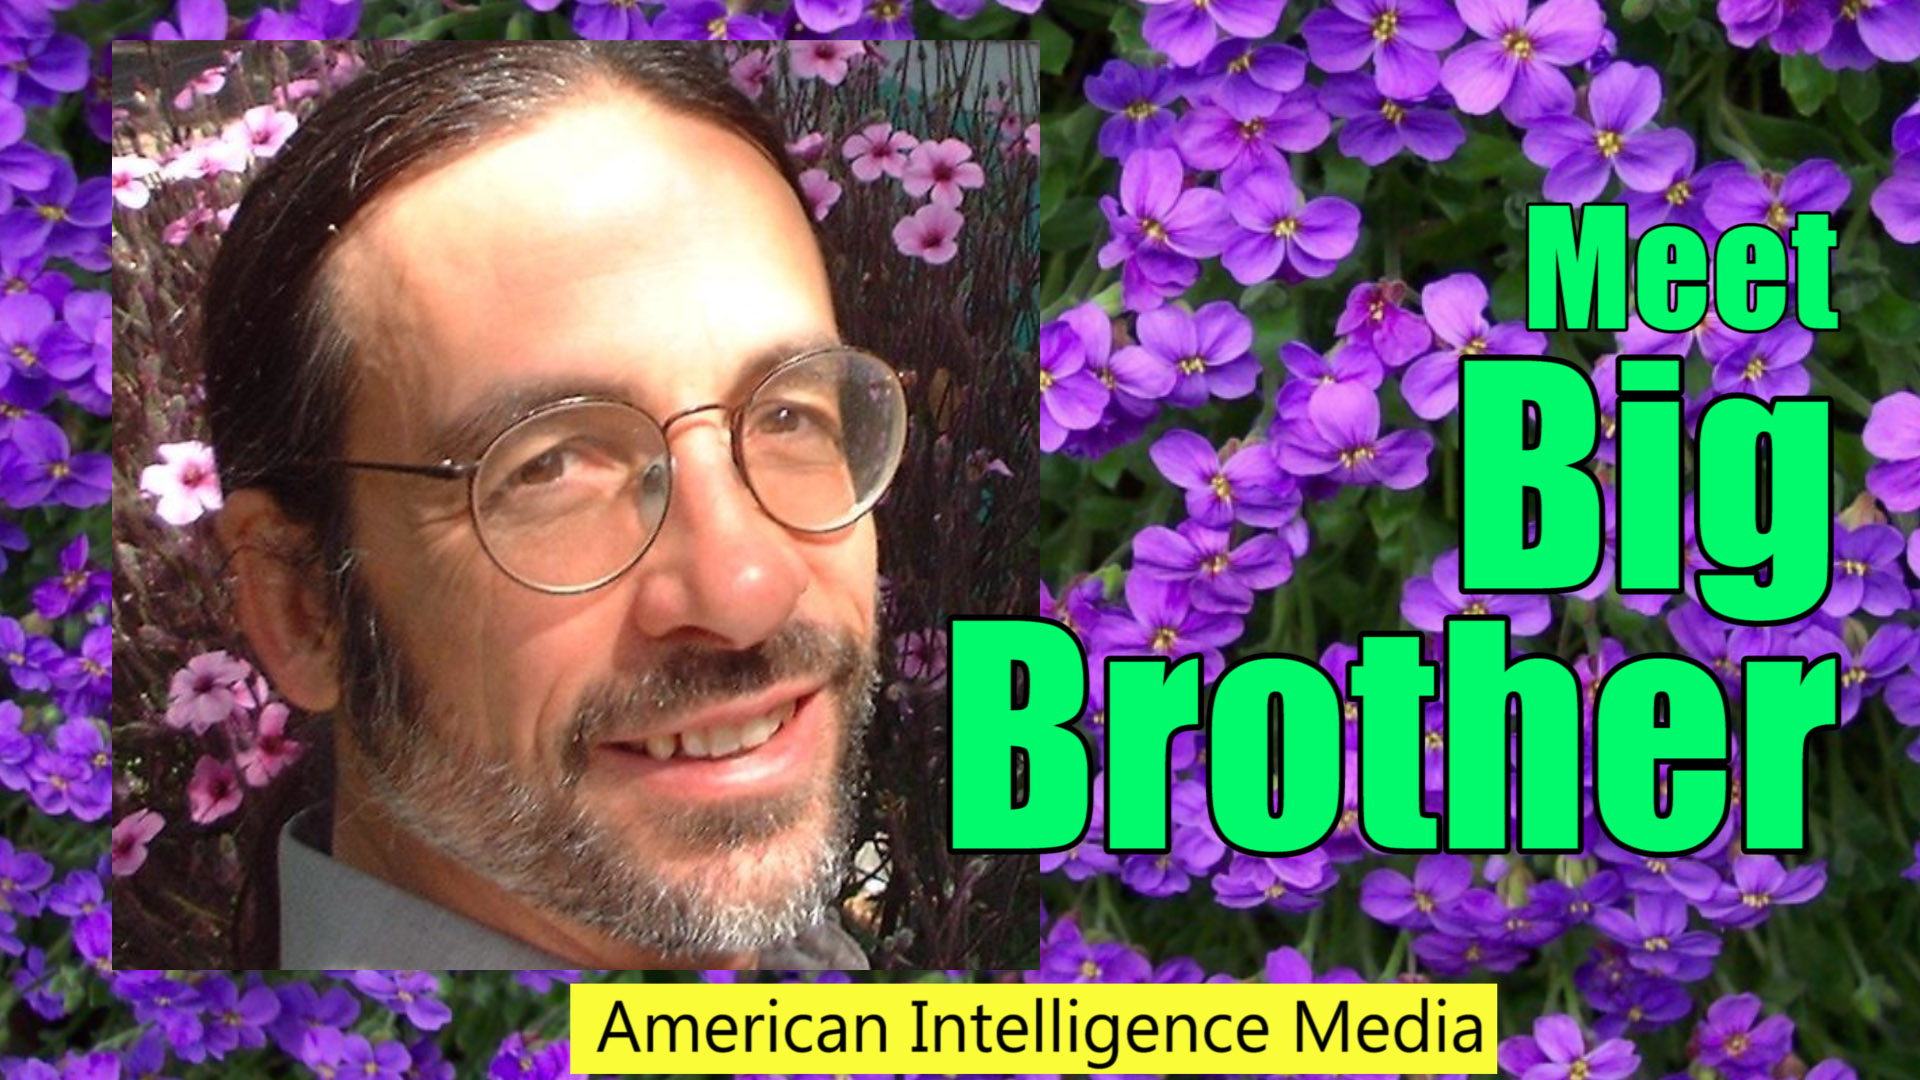 Douglas Gabriel. (Jan. 16, 2018). Meet The Person Who Can Remotely Crash Planes And Can Your Mind. American Intelligence Media.